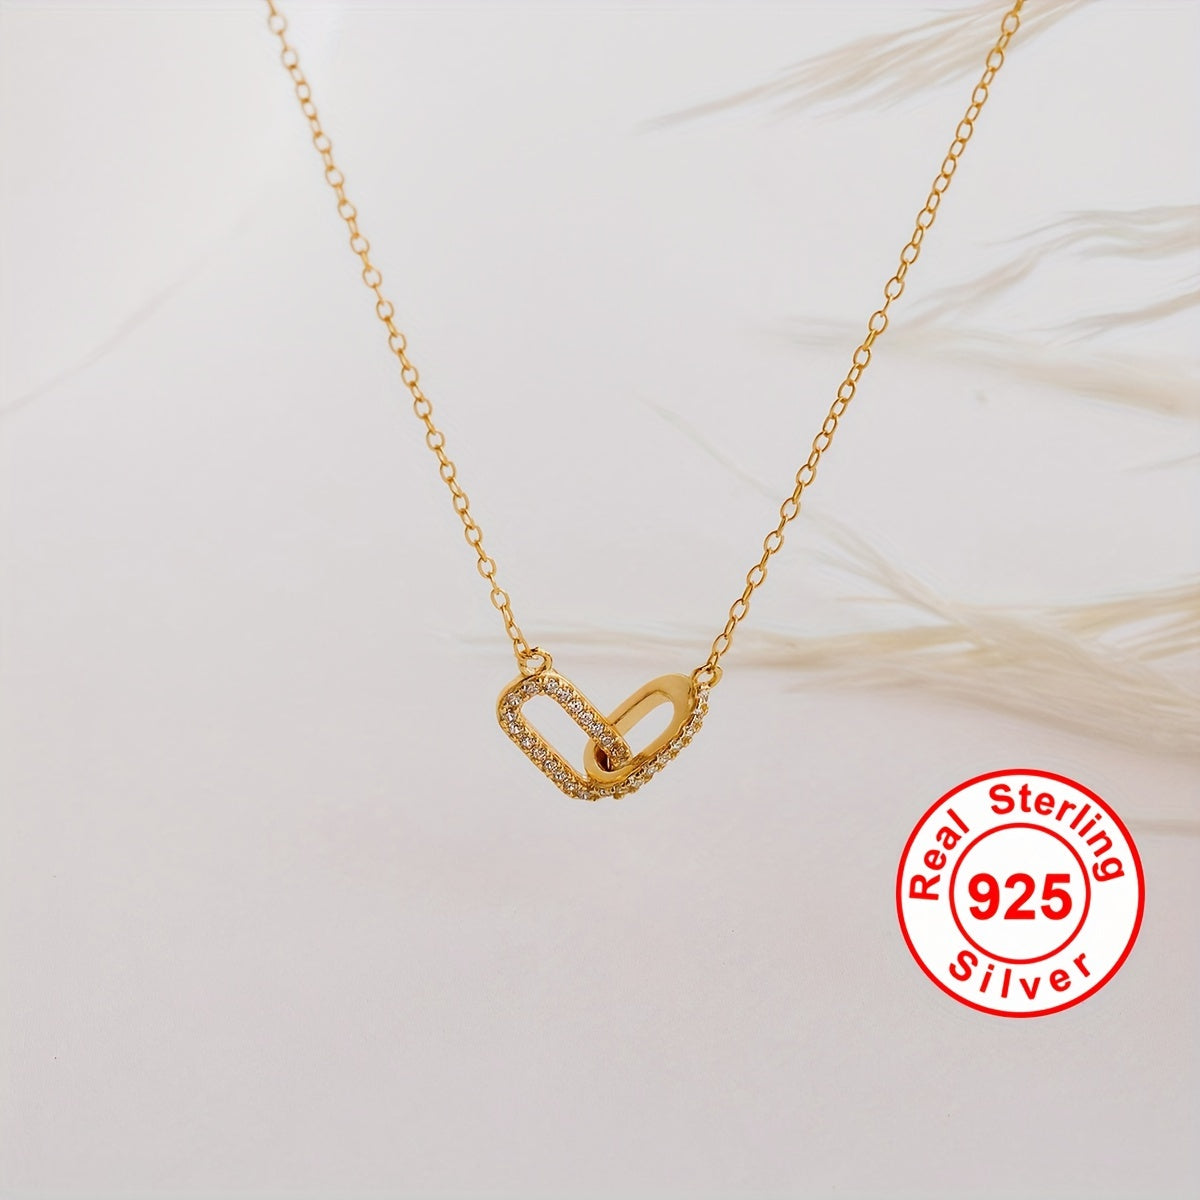 18K Gold Paperclip Necklace, Paperclip Diamond Necklace, Dainty Minimalist Necklace, Anniversary Birthday Valentine's Day Gift